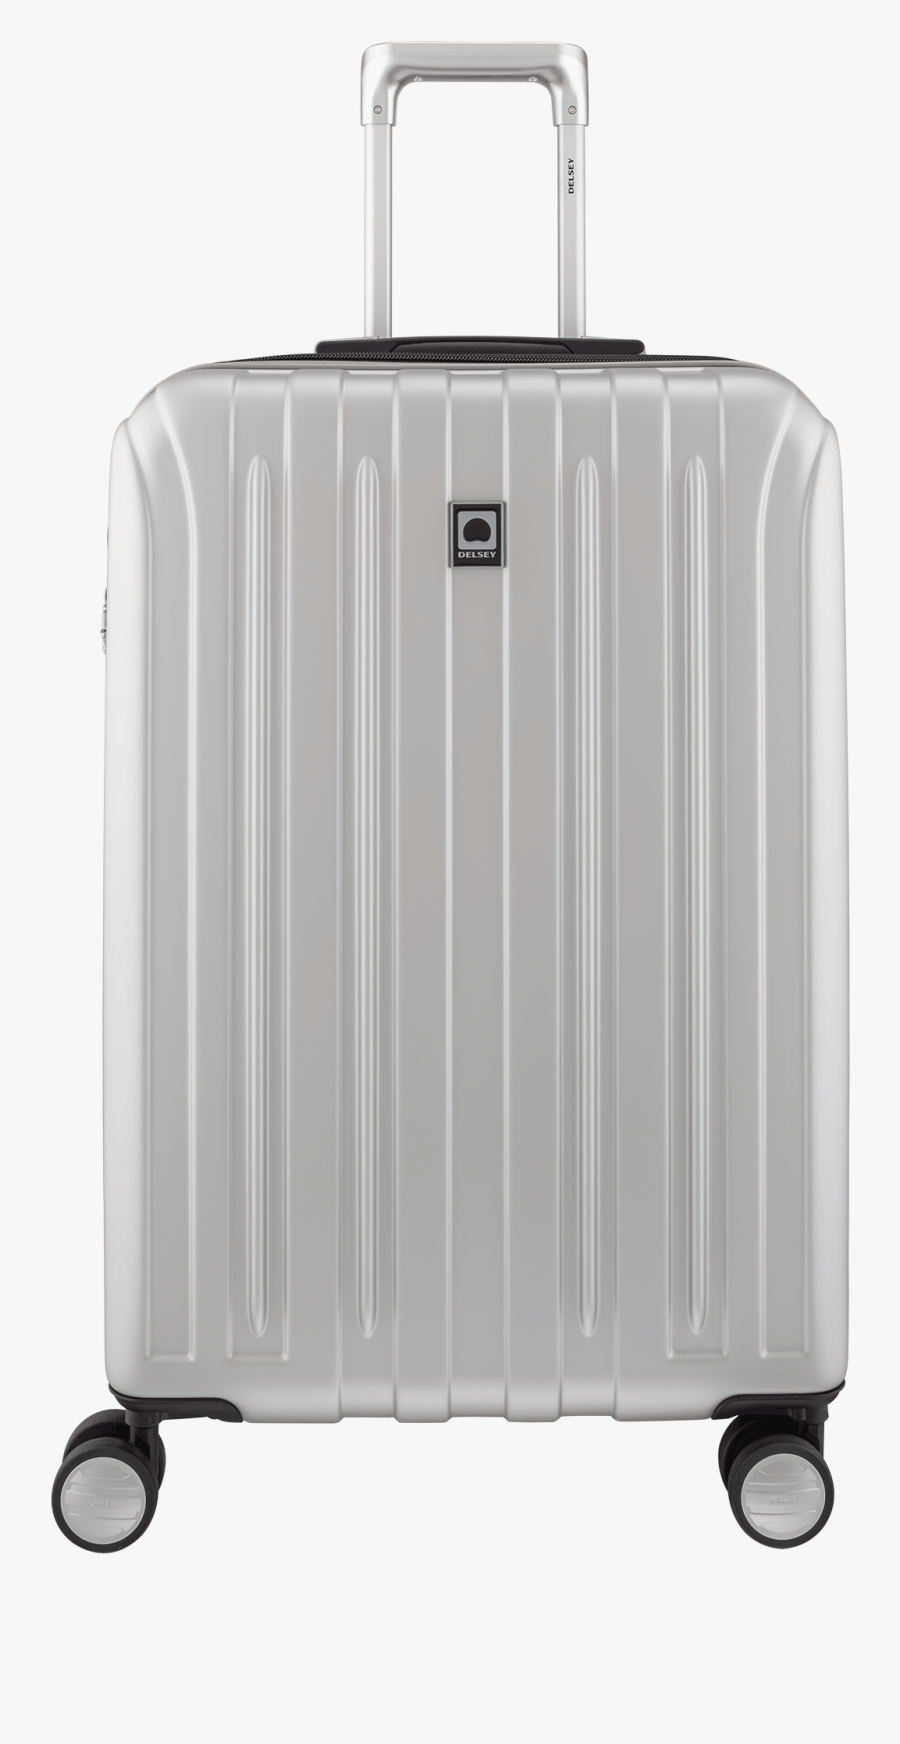 Luggage Png Image - Suitcase Png Free, Transparent Clipart